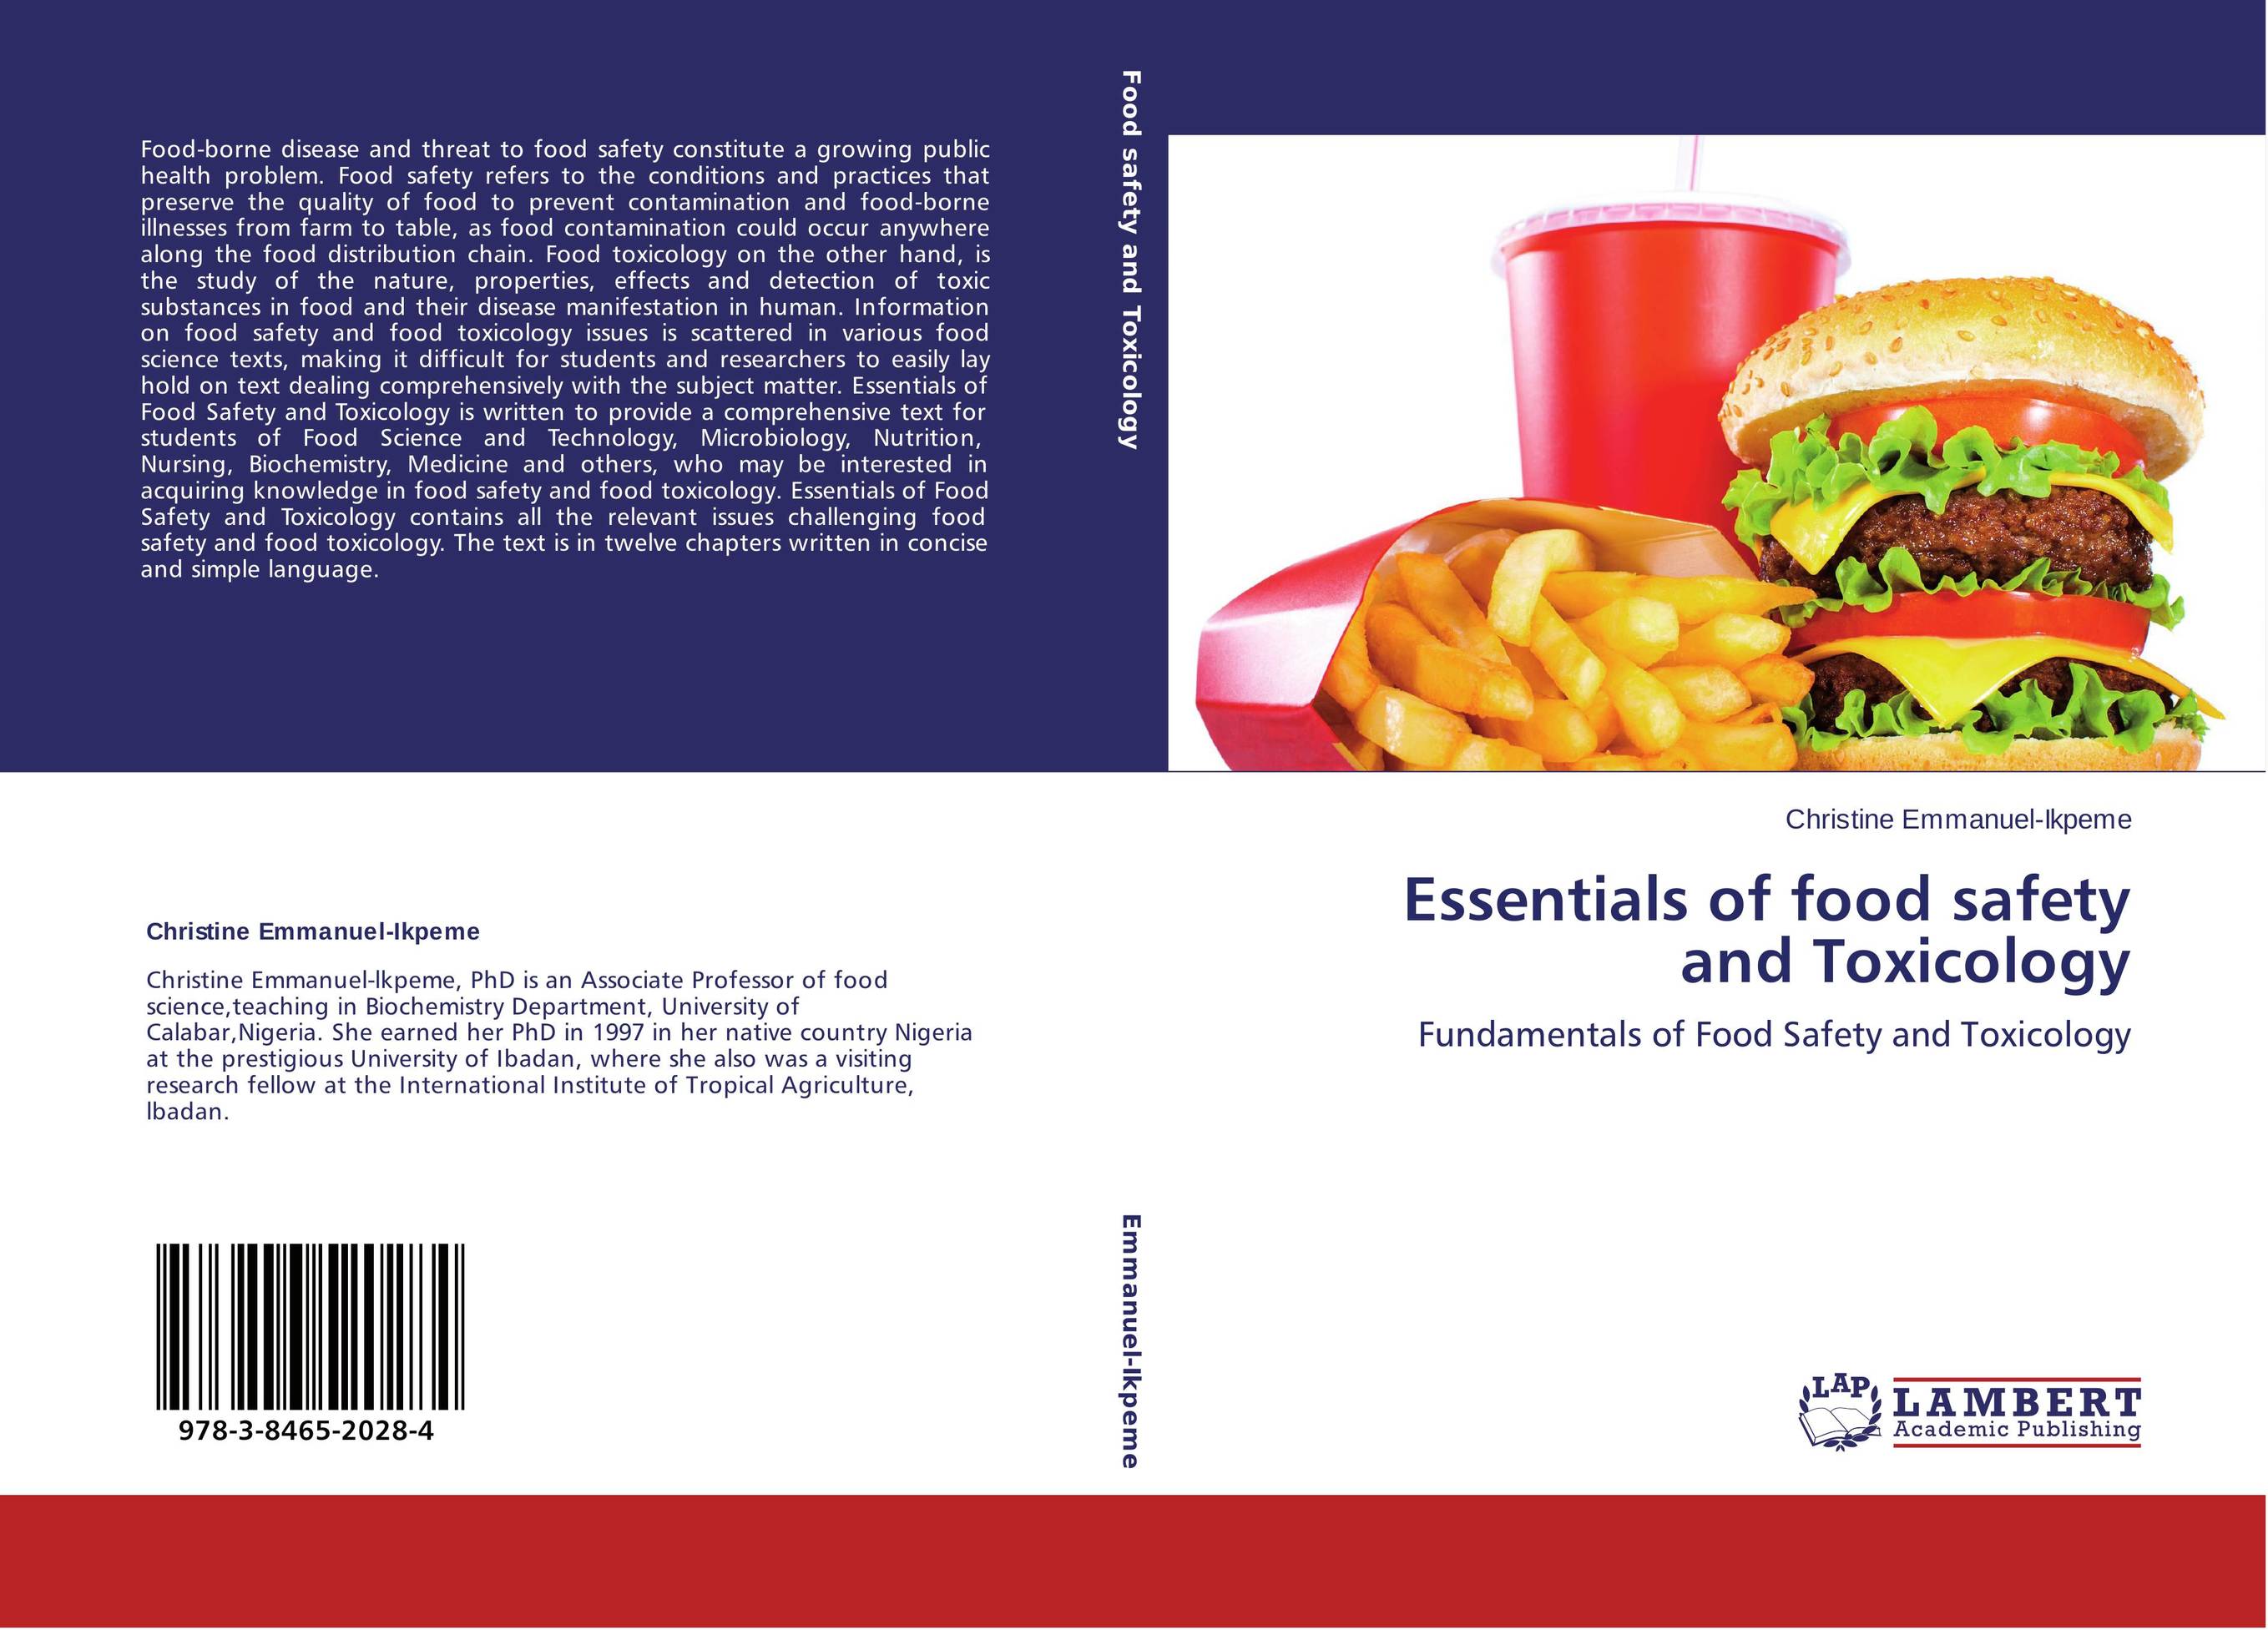 Фуд текст. Food Safety текст. Essentials of food Science. Center for food Safety. Nutritional Science from fundamentals to food.